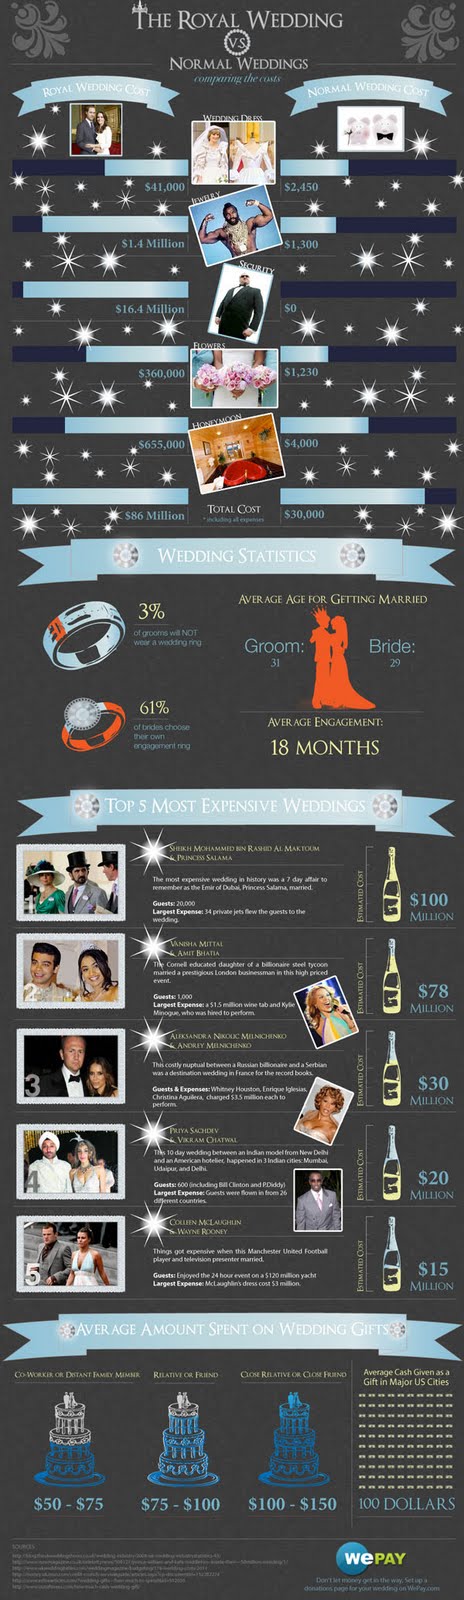 Here are some of the wedding Trivia Below is some fun Royal Wedding trivia